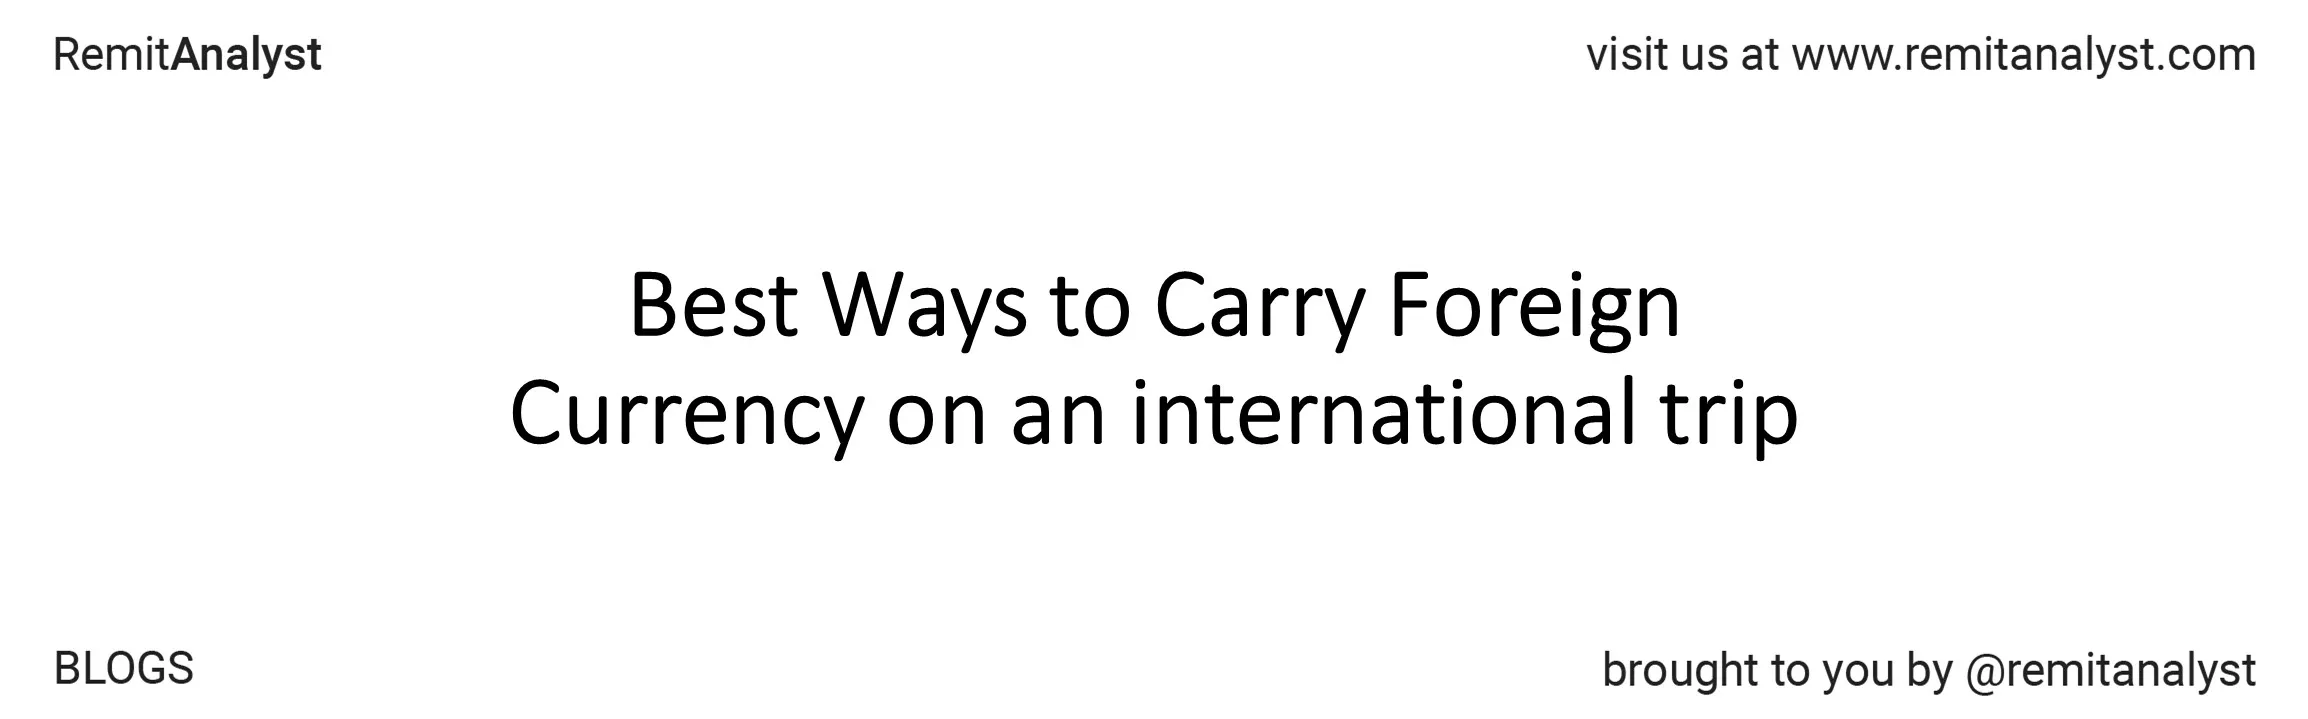 carry-foreign-currency-international-trip-title